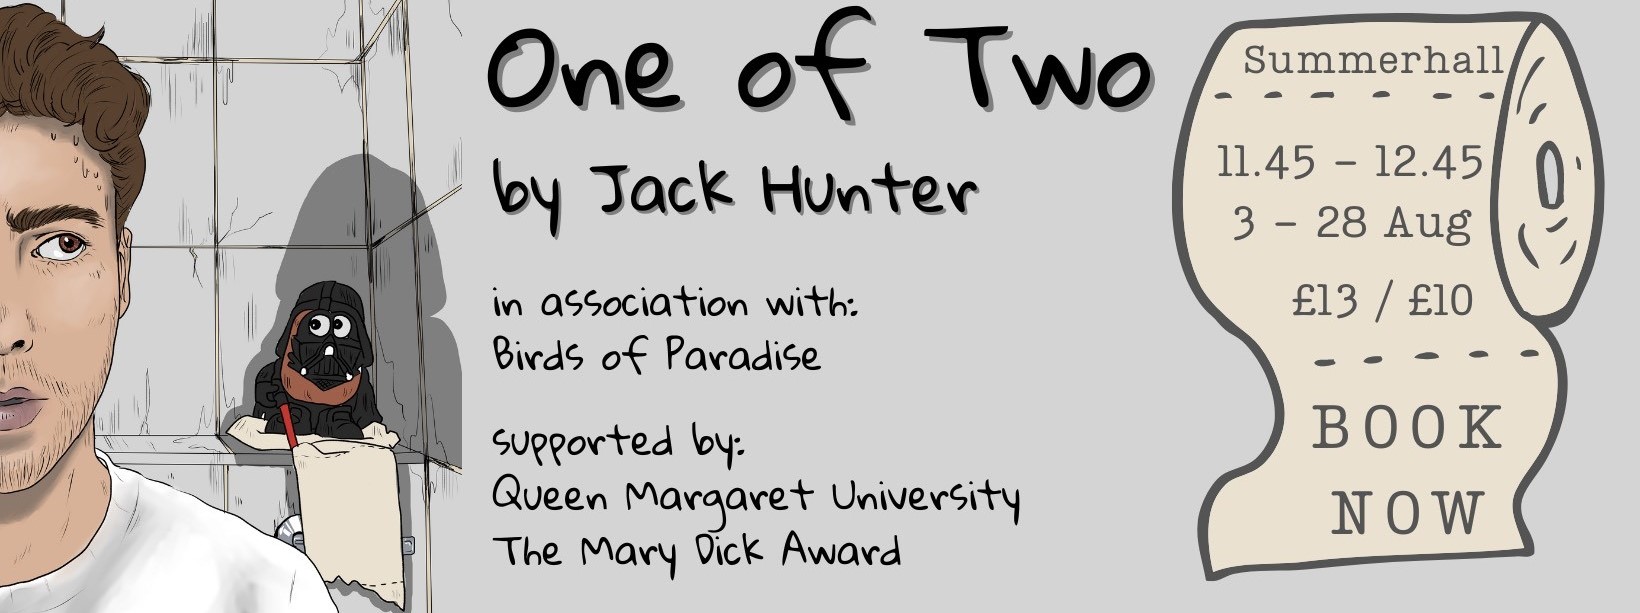 An interview with Jack Hunter by Jack Hunter